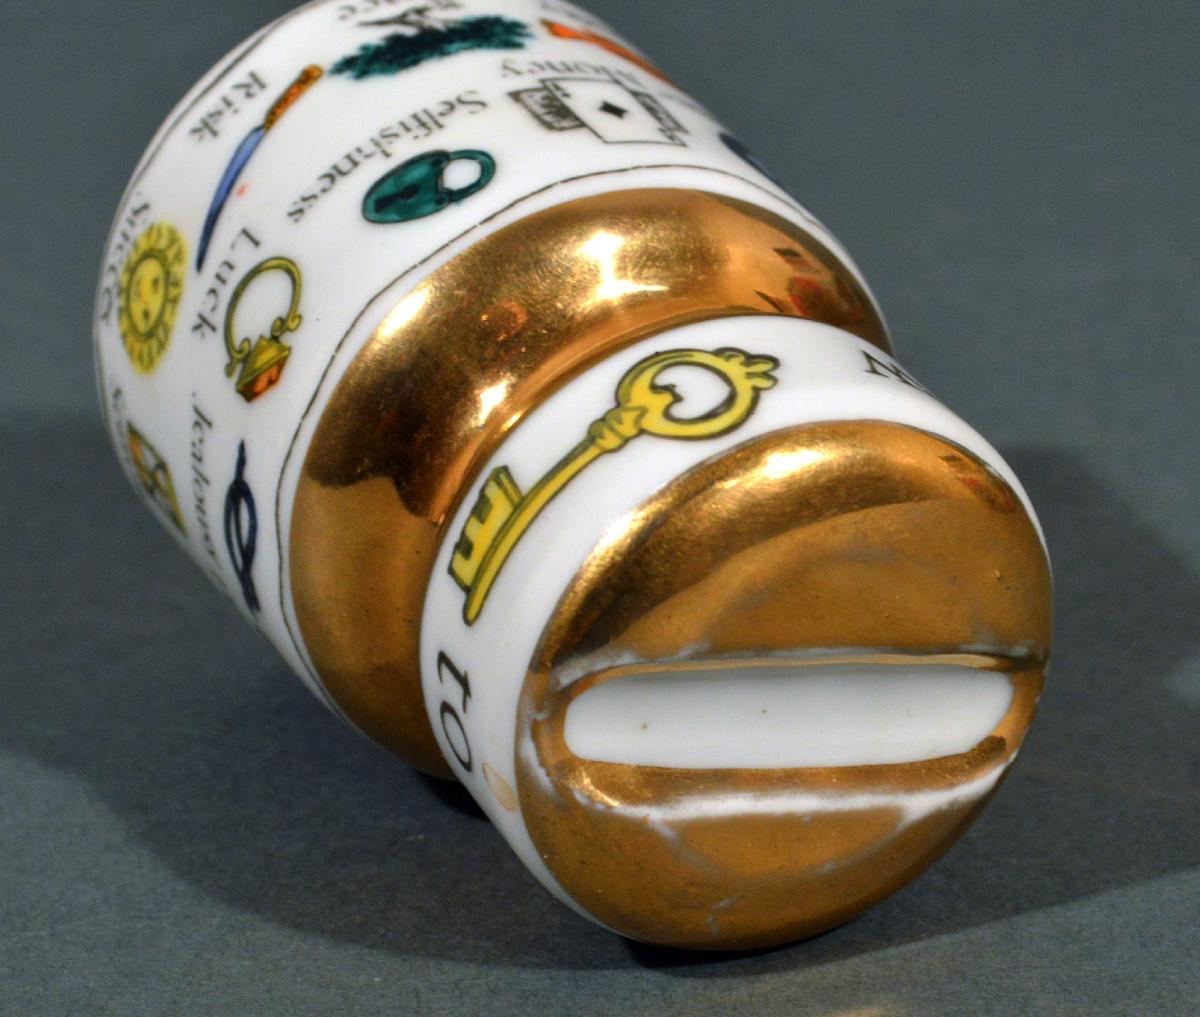 Vintage Piero Fornasetti Insulator Paperweight- "The New Key To Dreams", Late 1950's